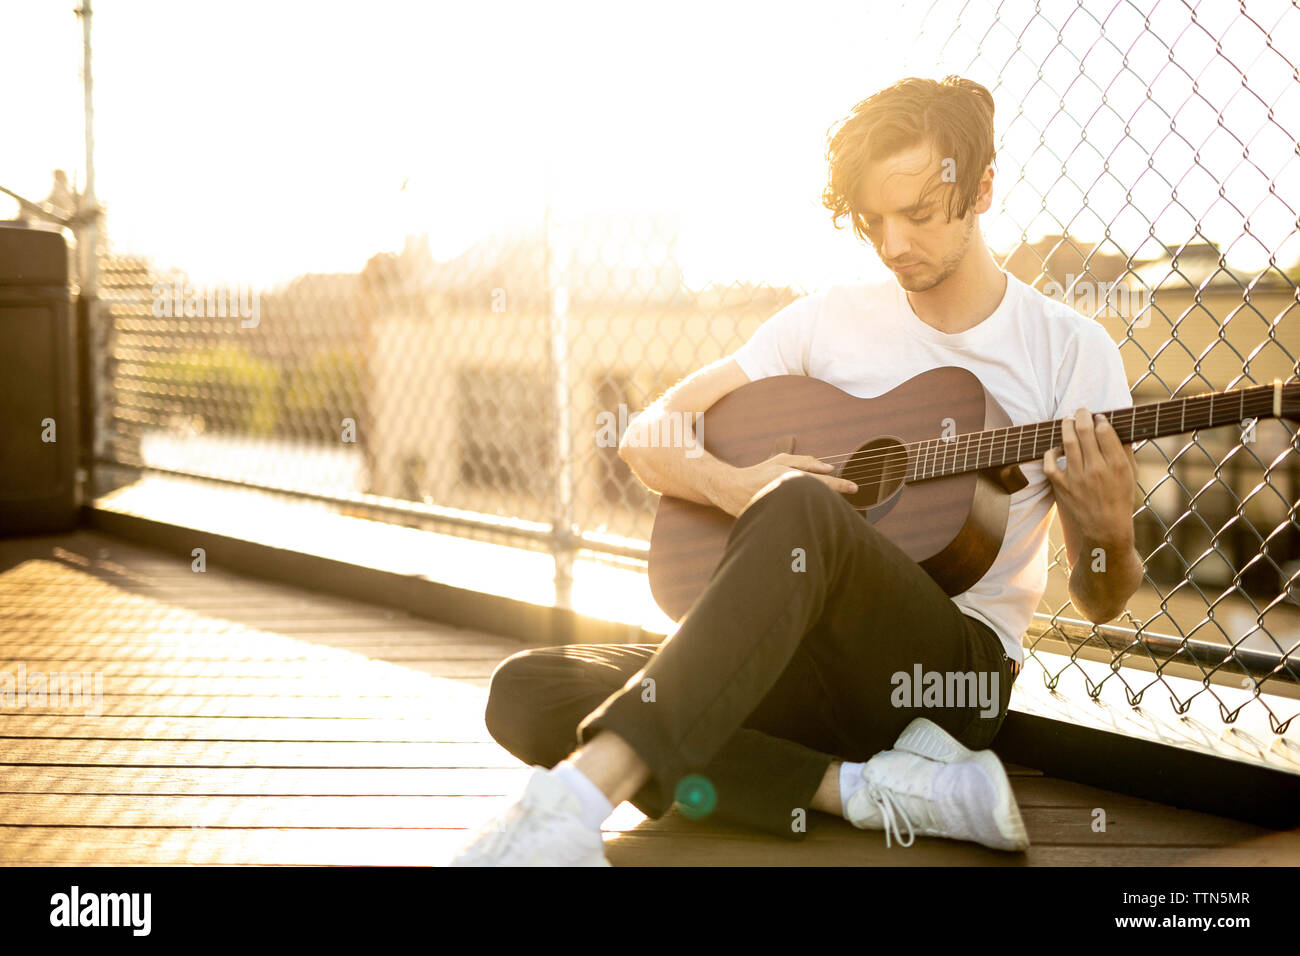 Man playing guitar while sitting by chainlink fence against sky during sunset Stock Photo